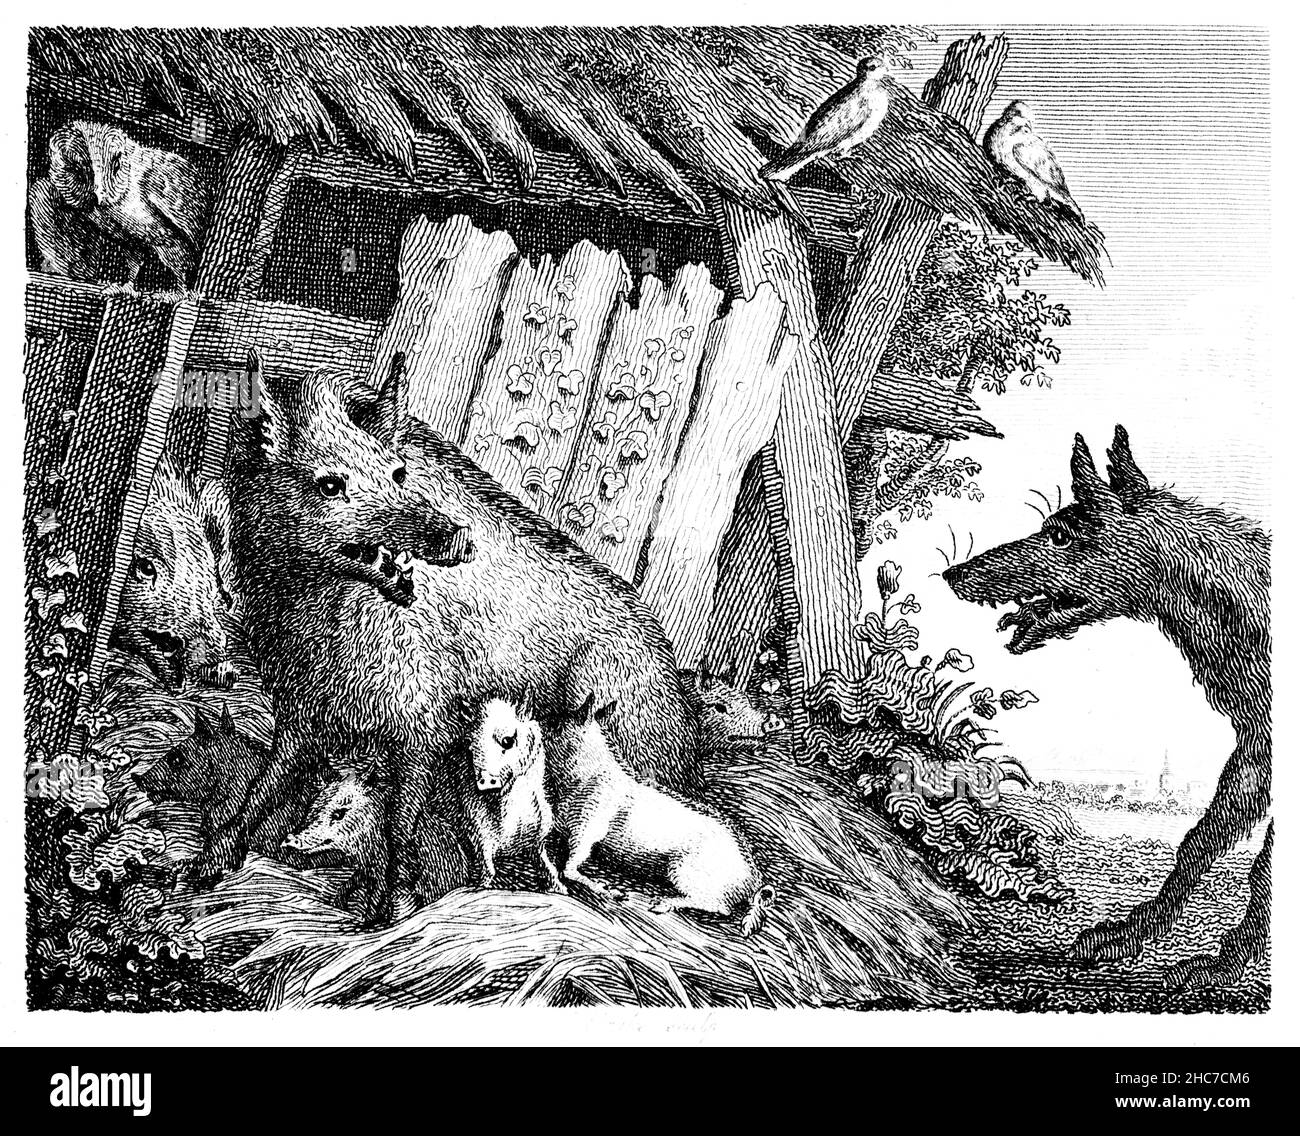 engraved illustration of The Sow and the Wolf, a tale of avoiding help from suspicious sources, from 1793 First Edition of Stockdale’s Aesop’s Fables Stock Photo